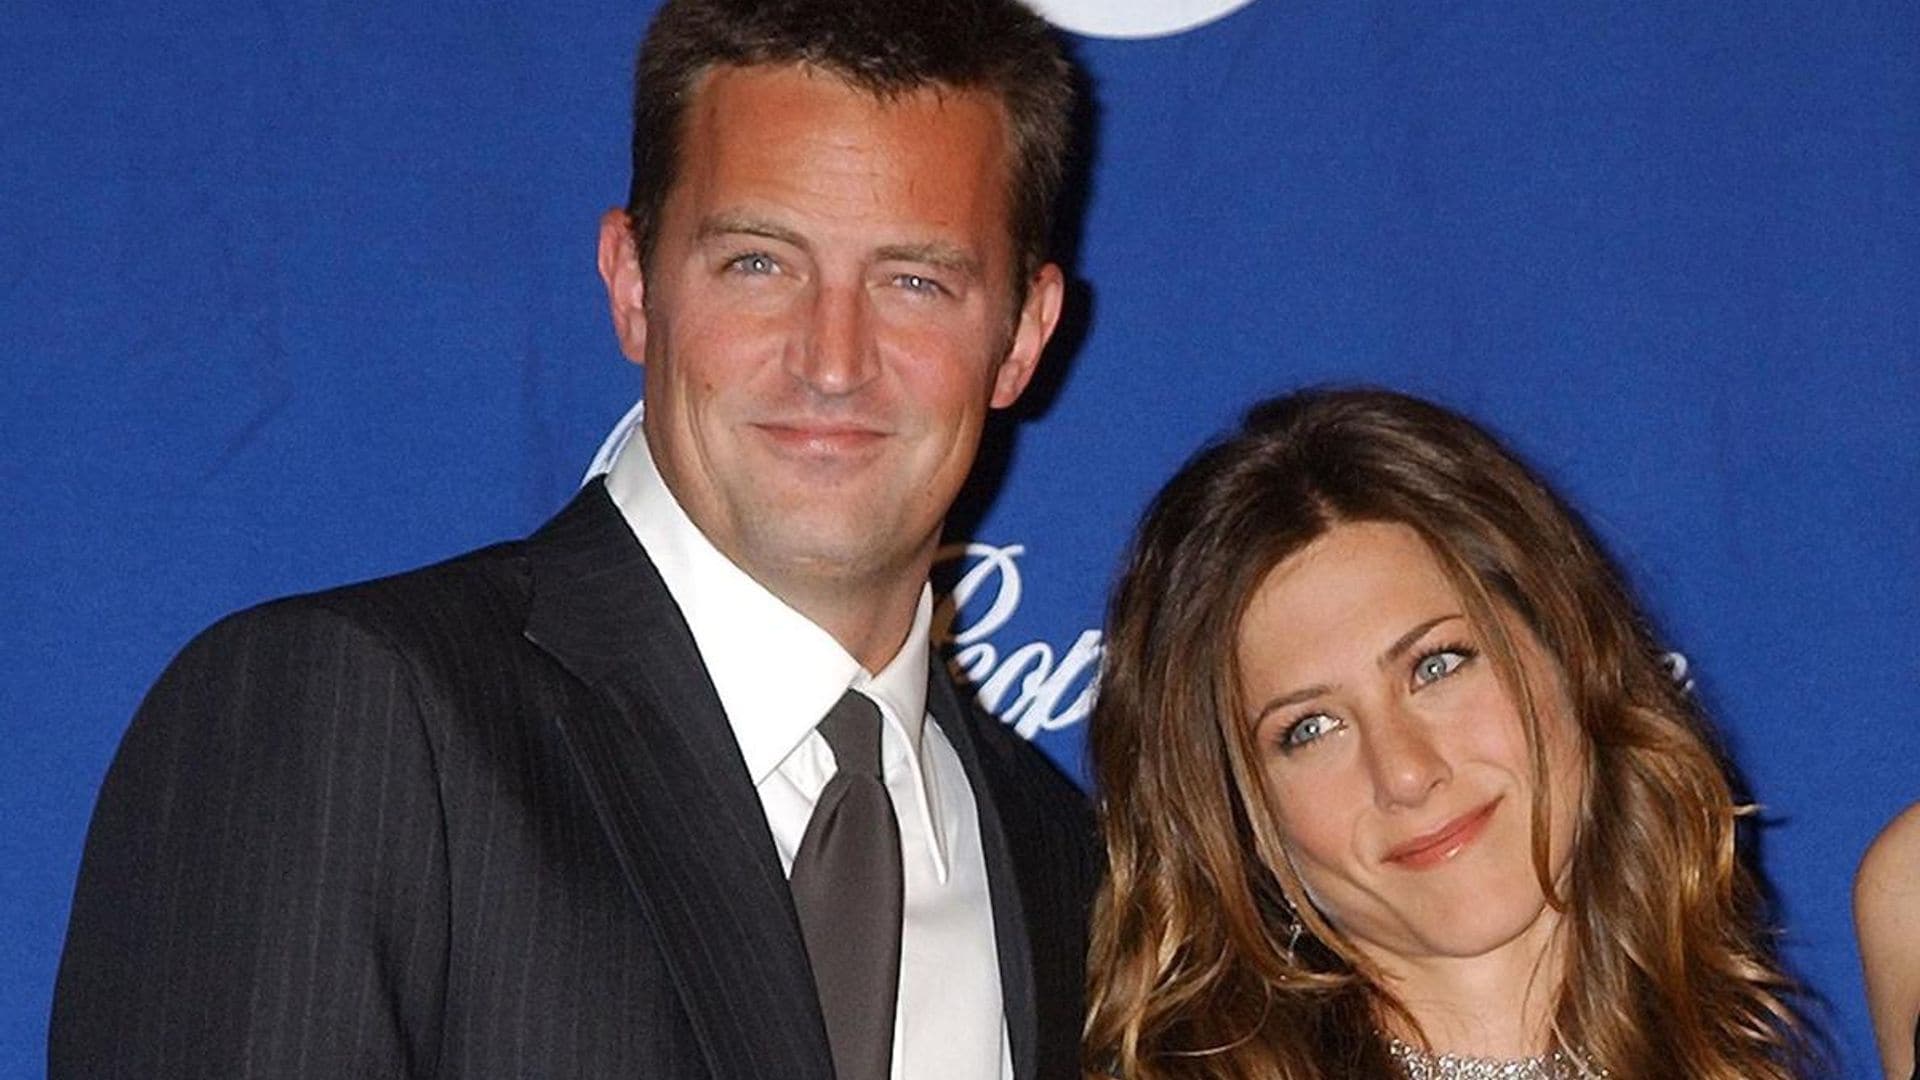 Jennifer Aniston reveals she was in touch with Matthew Perry before he died; ‘He was happy’